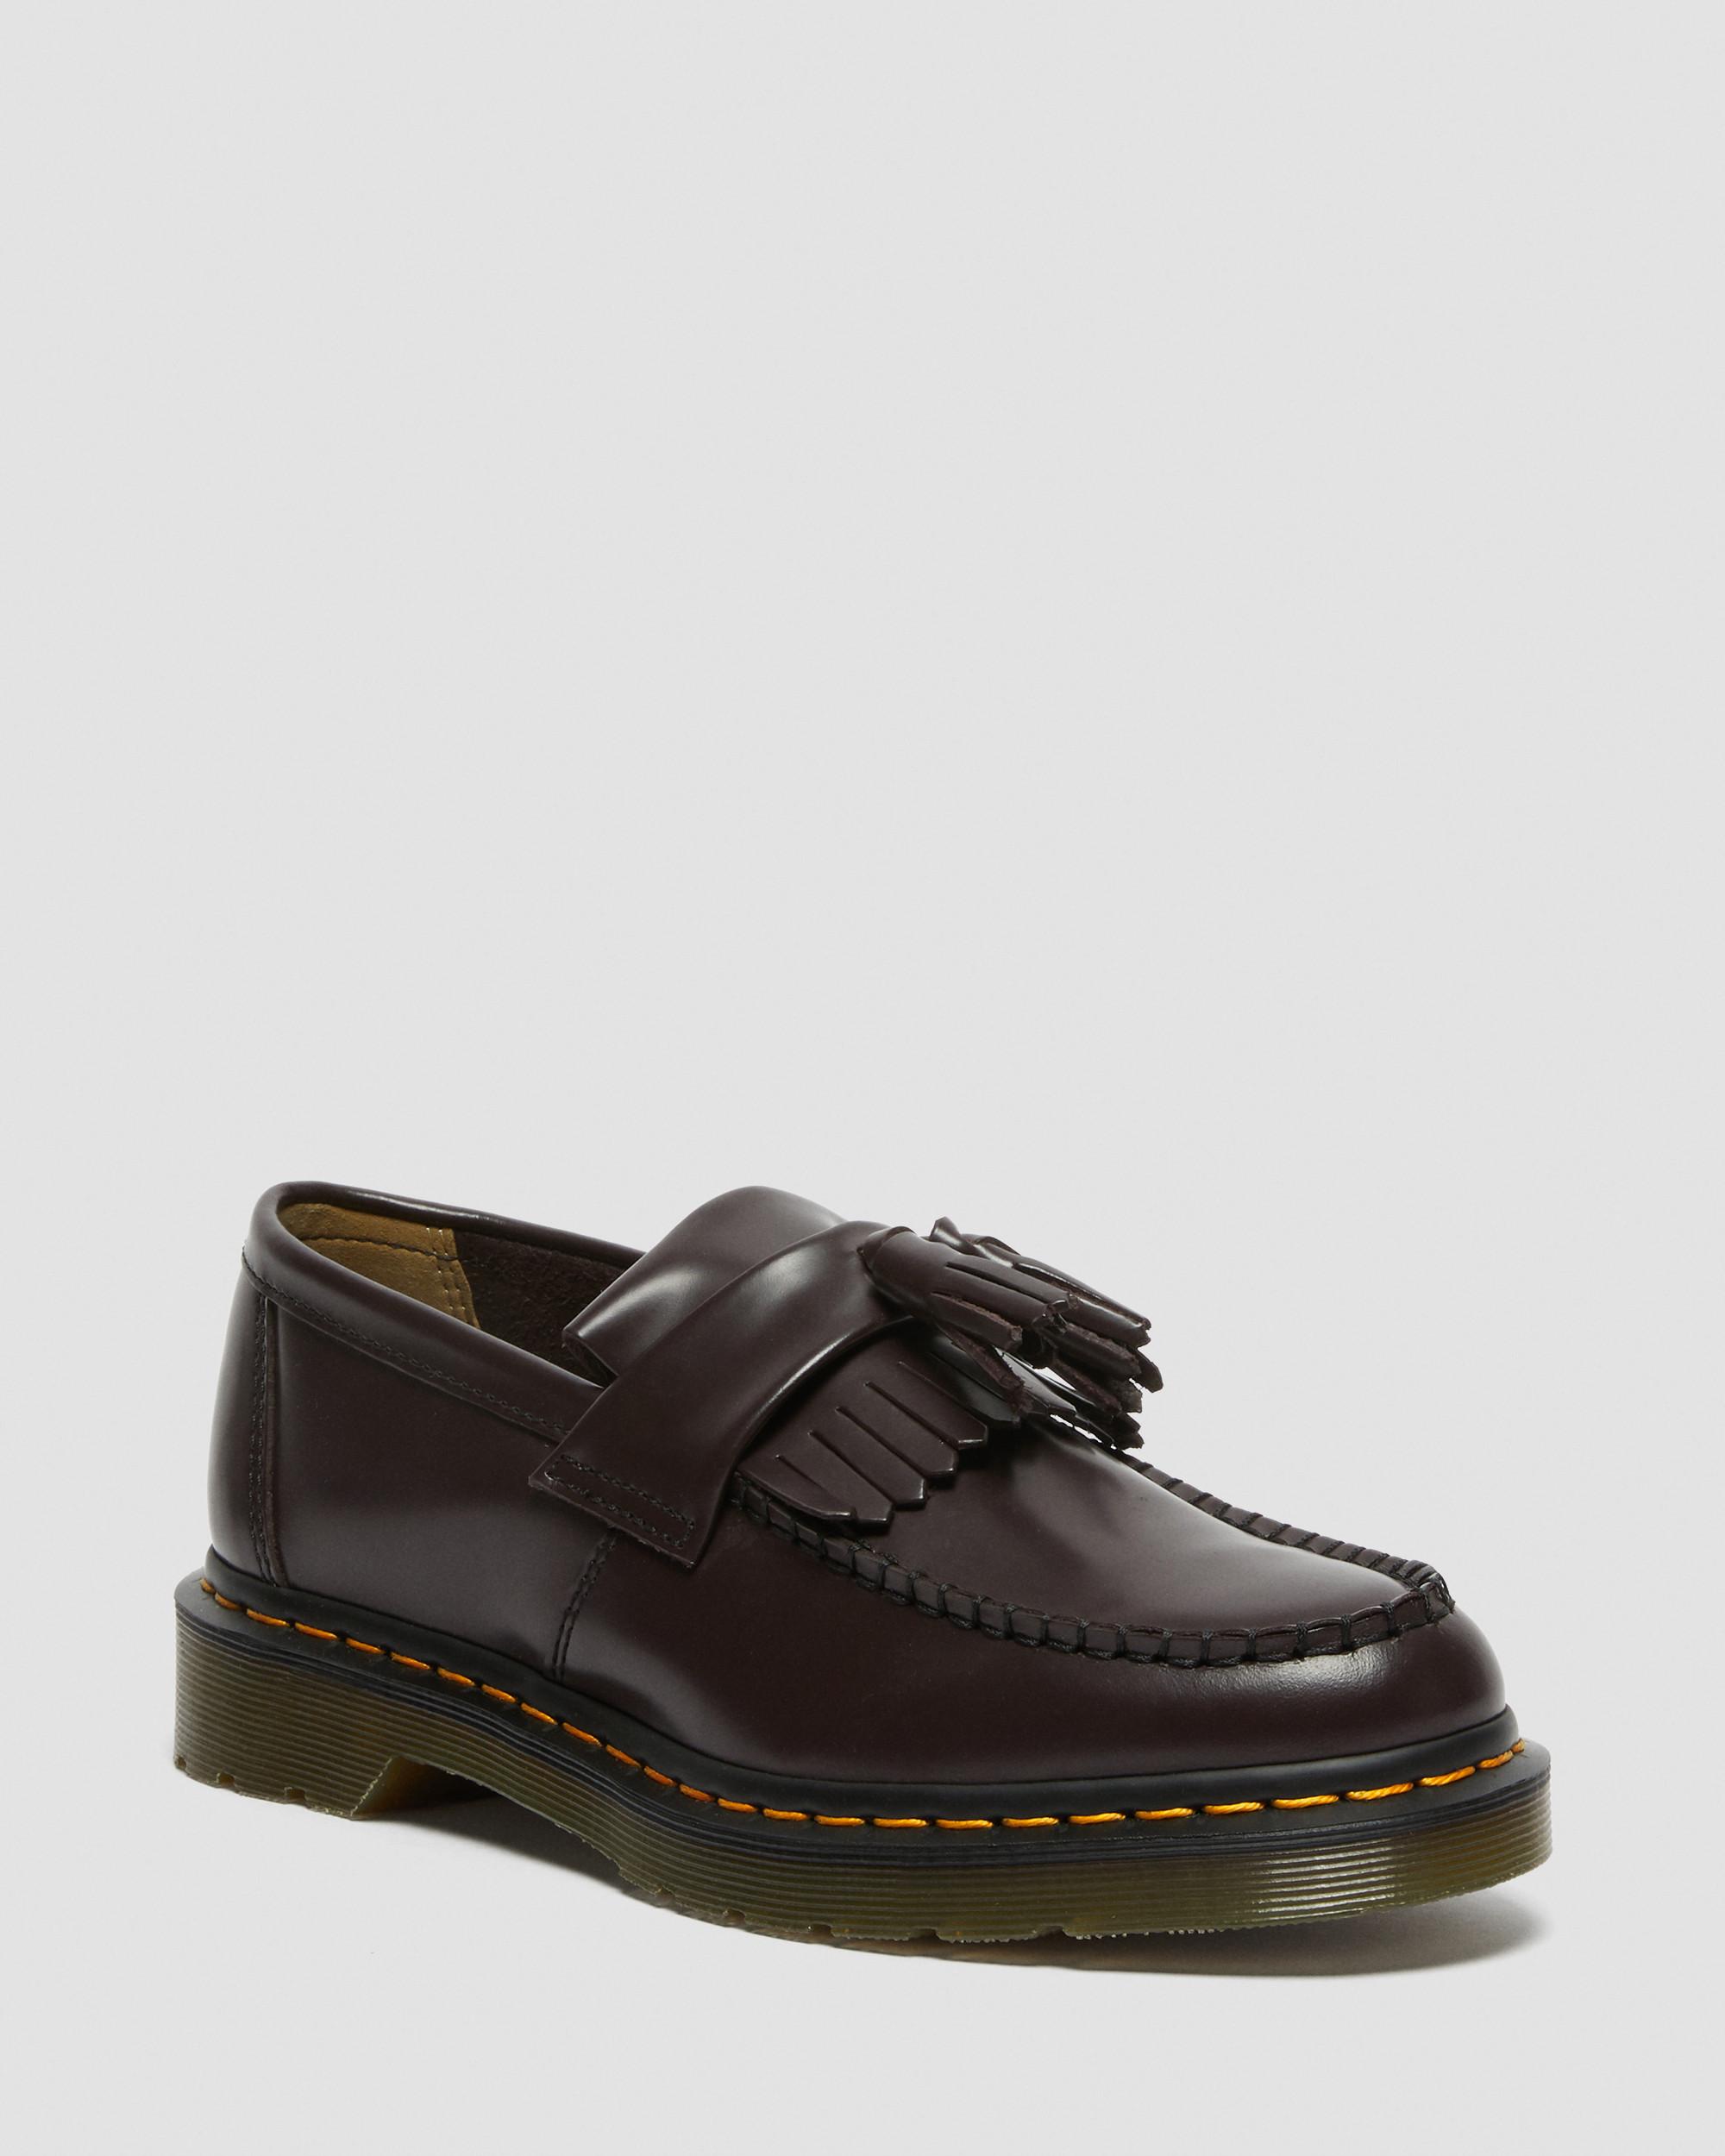 Adrian Yellow Stitch Smooth Leather Tassle Loafers